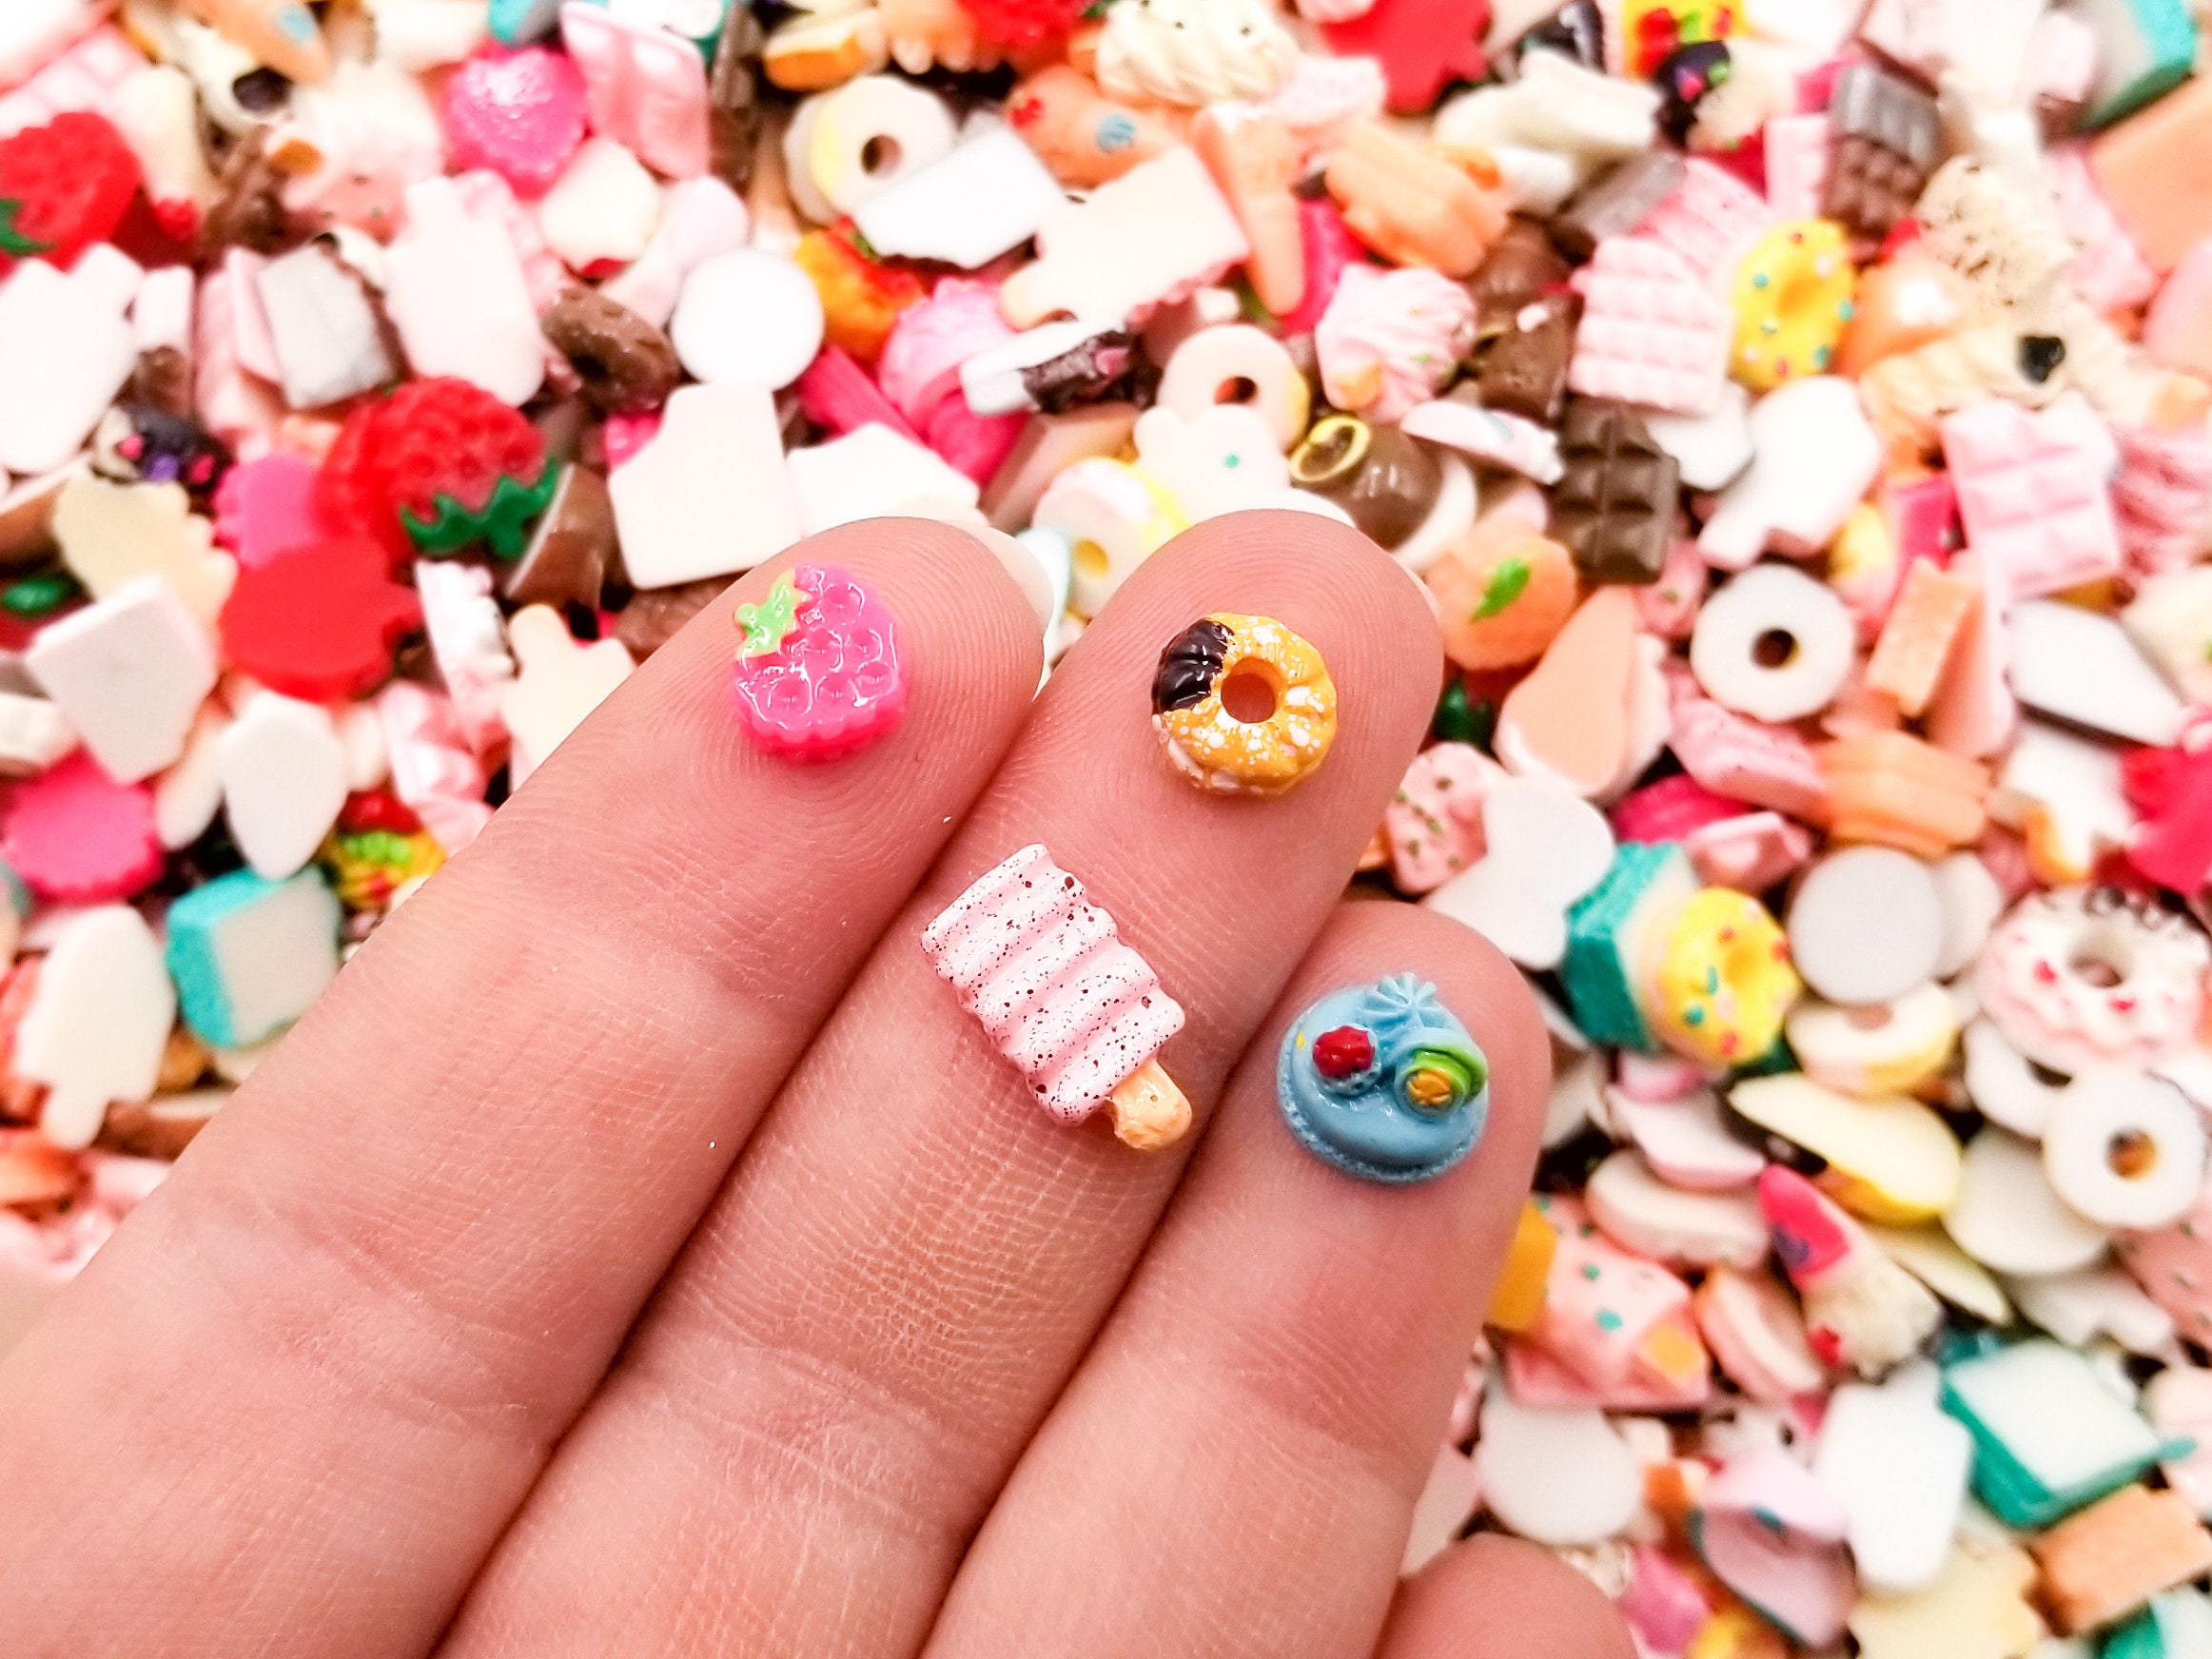  40 Pcs Nail Charms, TemBelle Slime Charms, Resin Flatbacks 3D Nail  Charms for Nail Art Decorations Supplies, DIY Art Nail,Hair Clips,  Refrigerator Magnets, Dress Up and Phone Cases Etc (4Colors) 